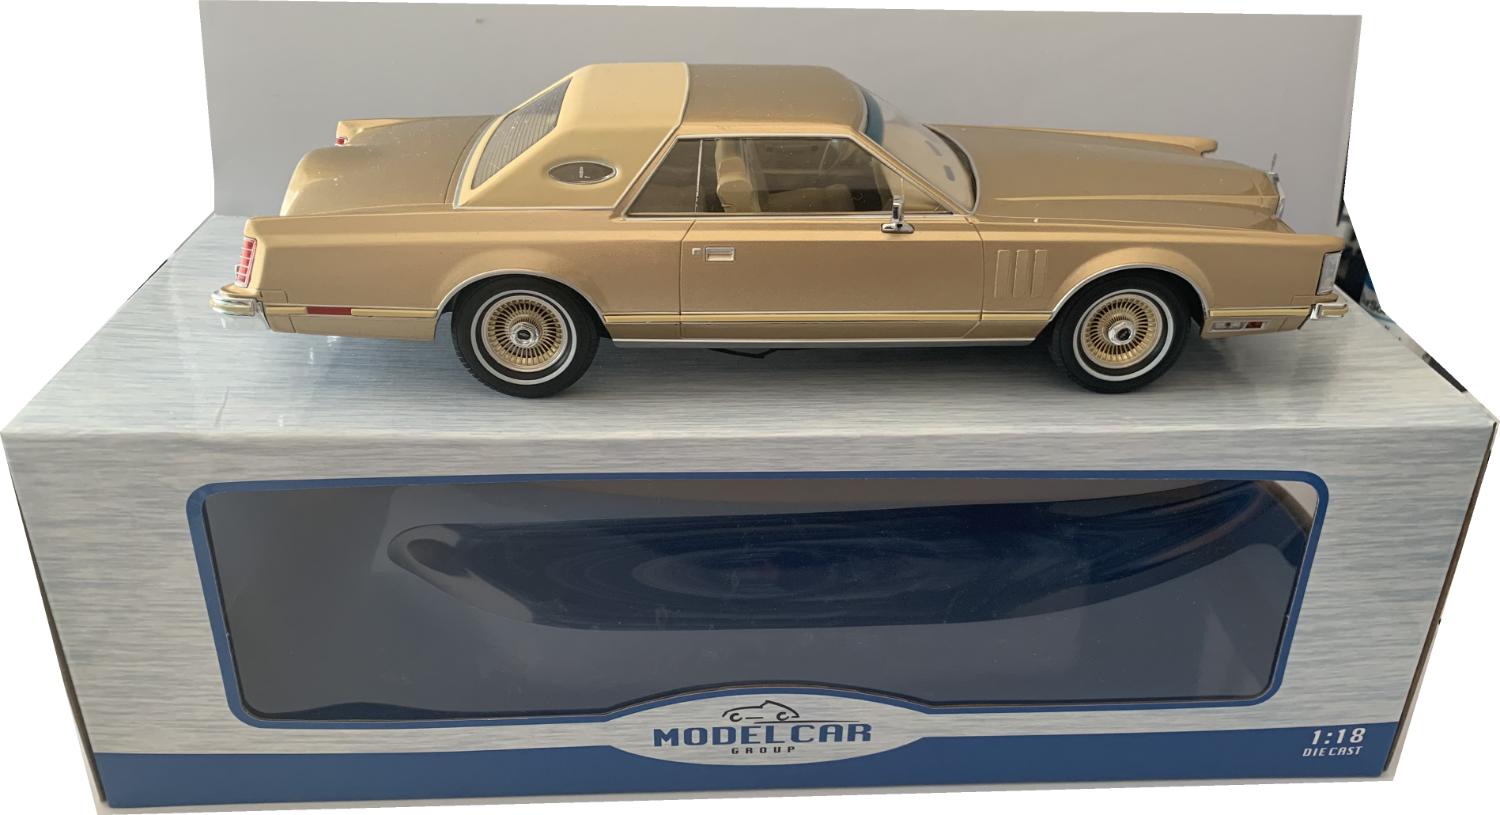 An excellent scale model of the Lincoln Continental mk 5 with high level of detail throughout, all authentically recreated.  Model is presented on a removable plinth in a window display box. The car is approx. 32 cm long and the presentation box is 40.5 cm long